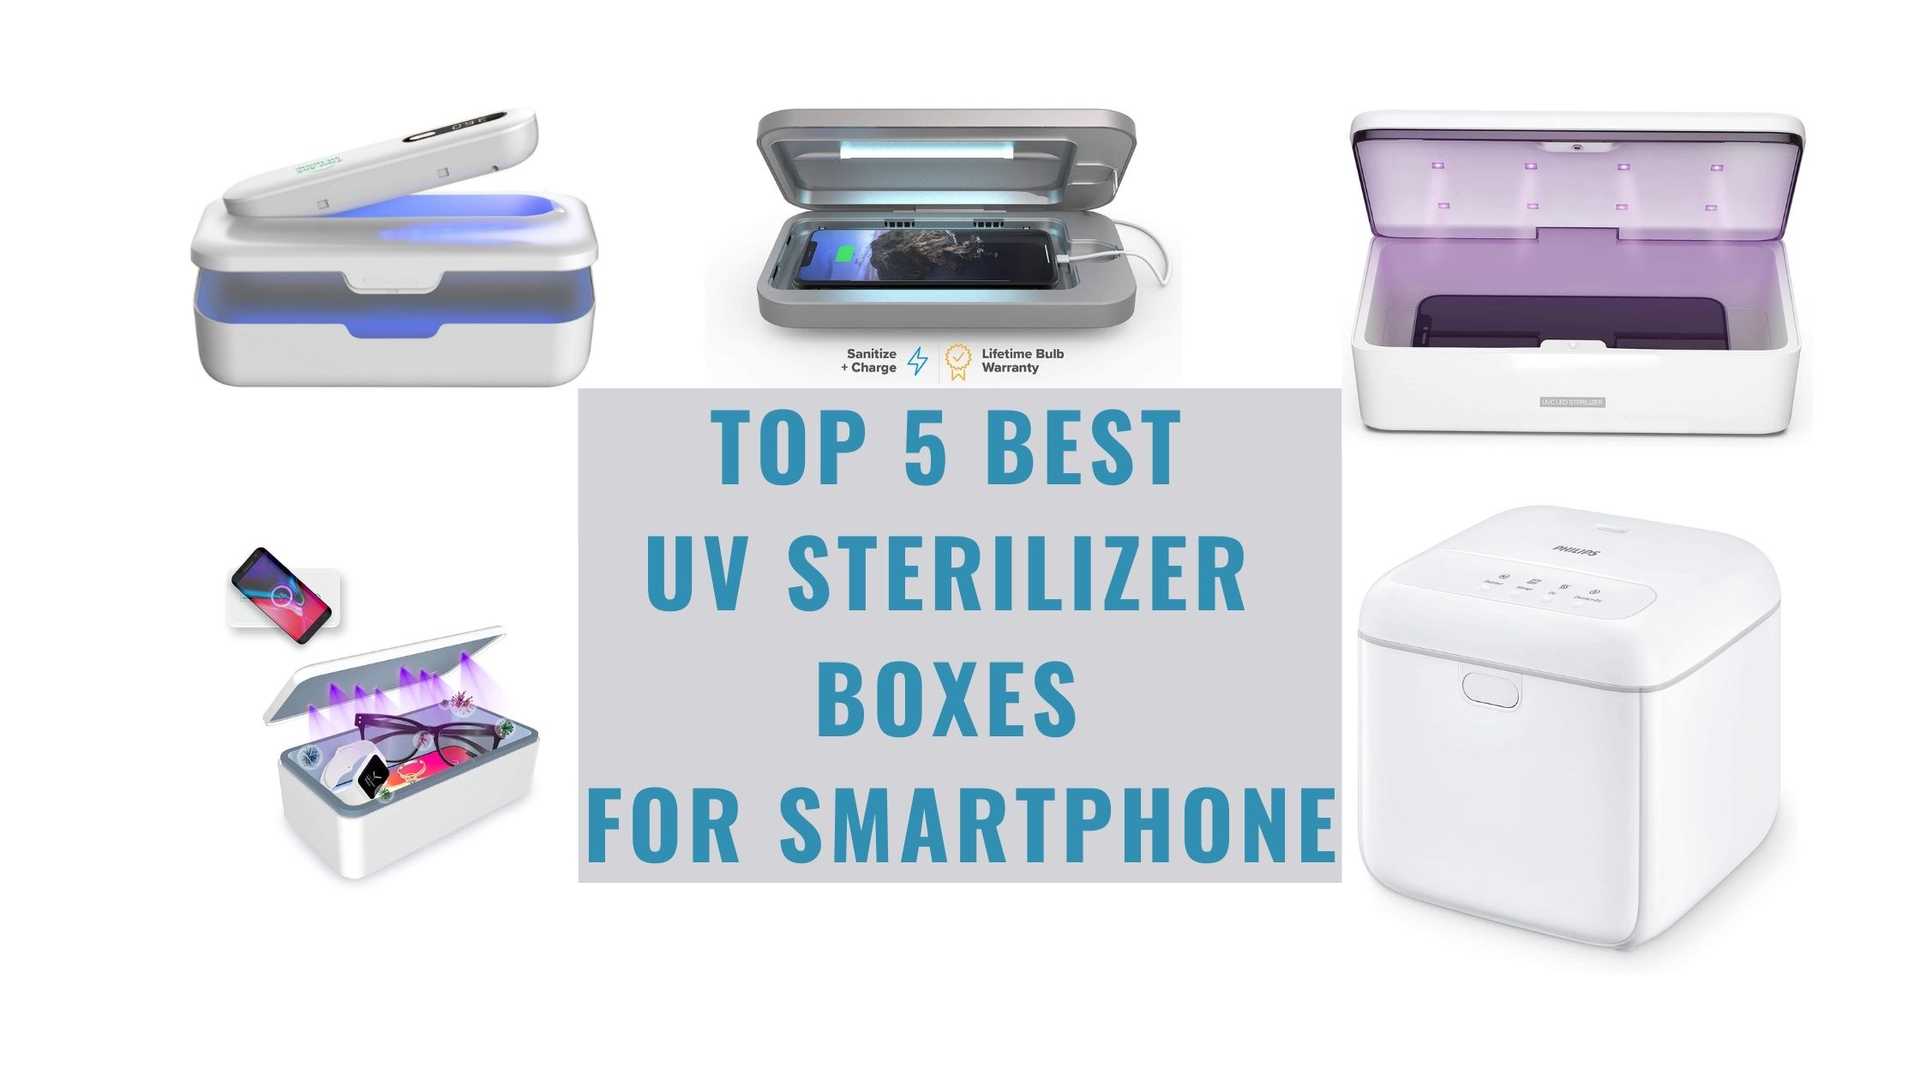 Top 5 Best UV Sterilizer Boxes for Smartphone📱 in 2022